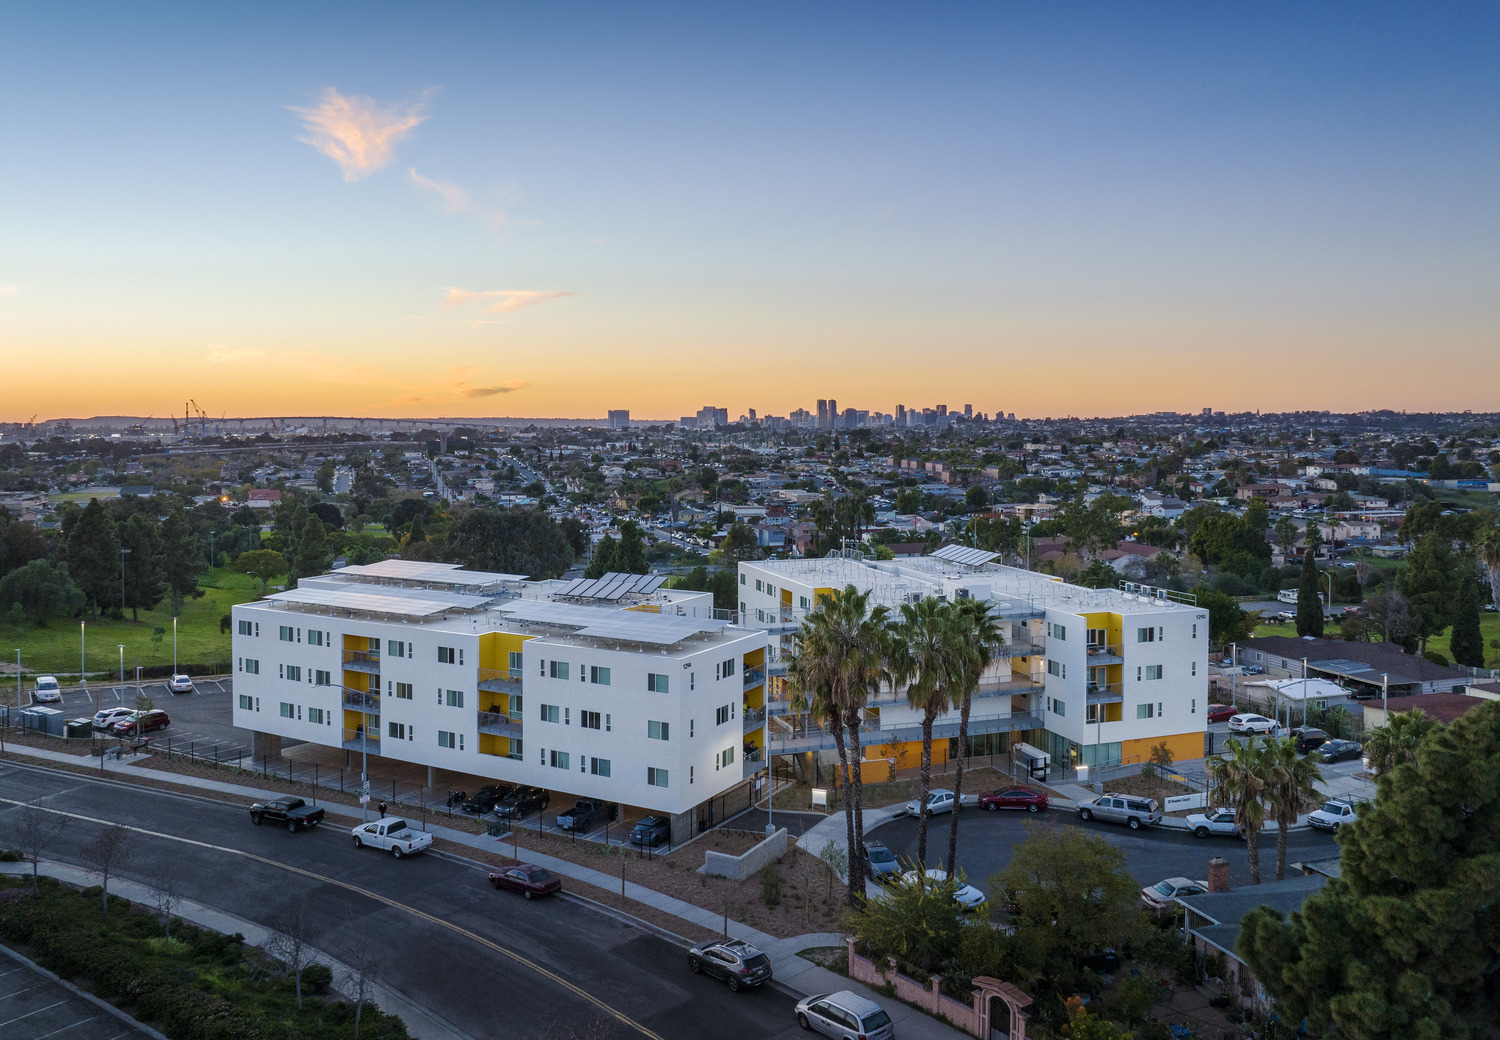 Keeler Court Apartments Open, Fulfilling a Great Need for Housing in San Diego with 71 Homes